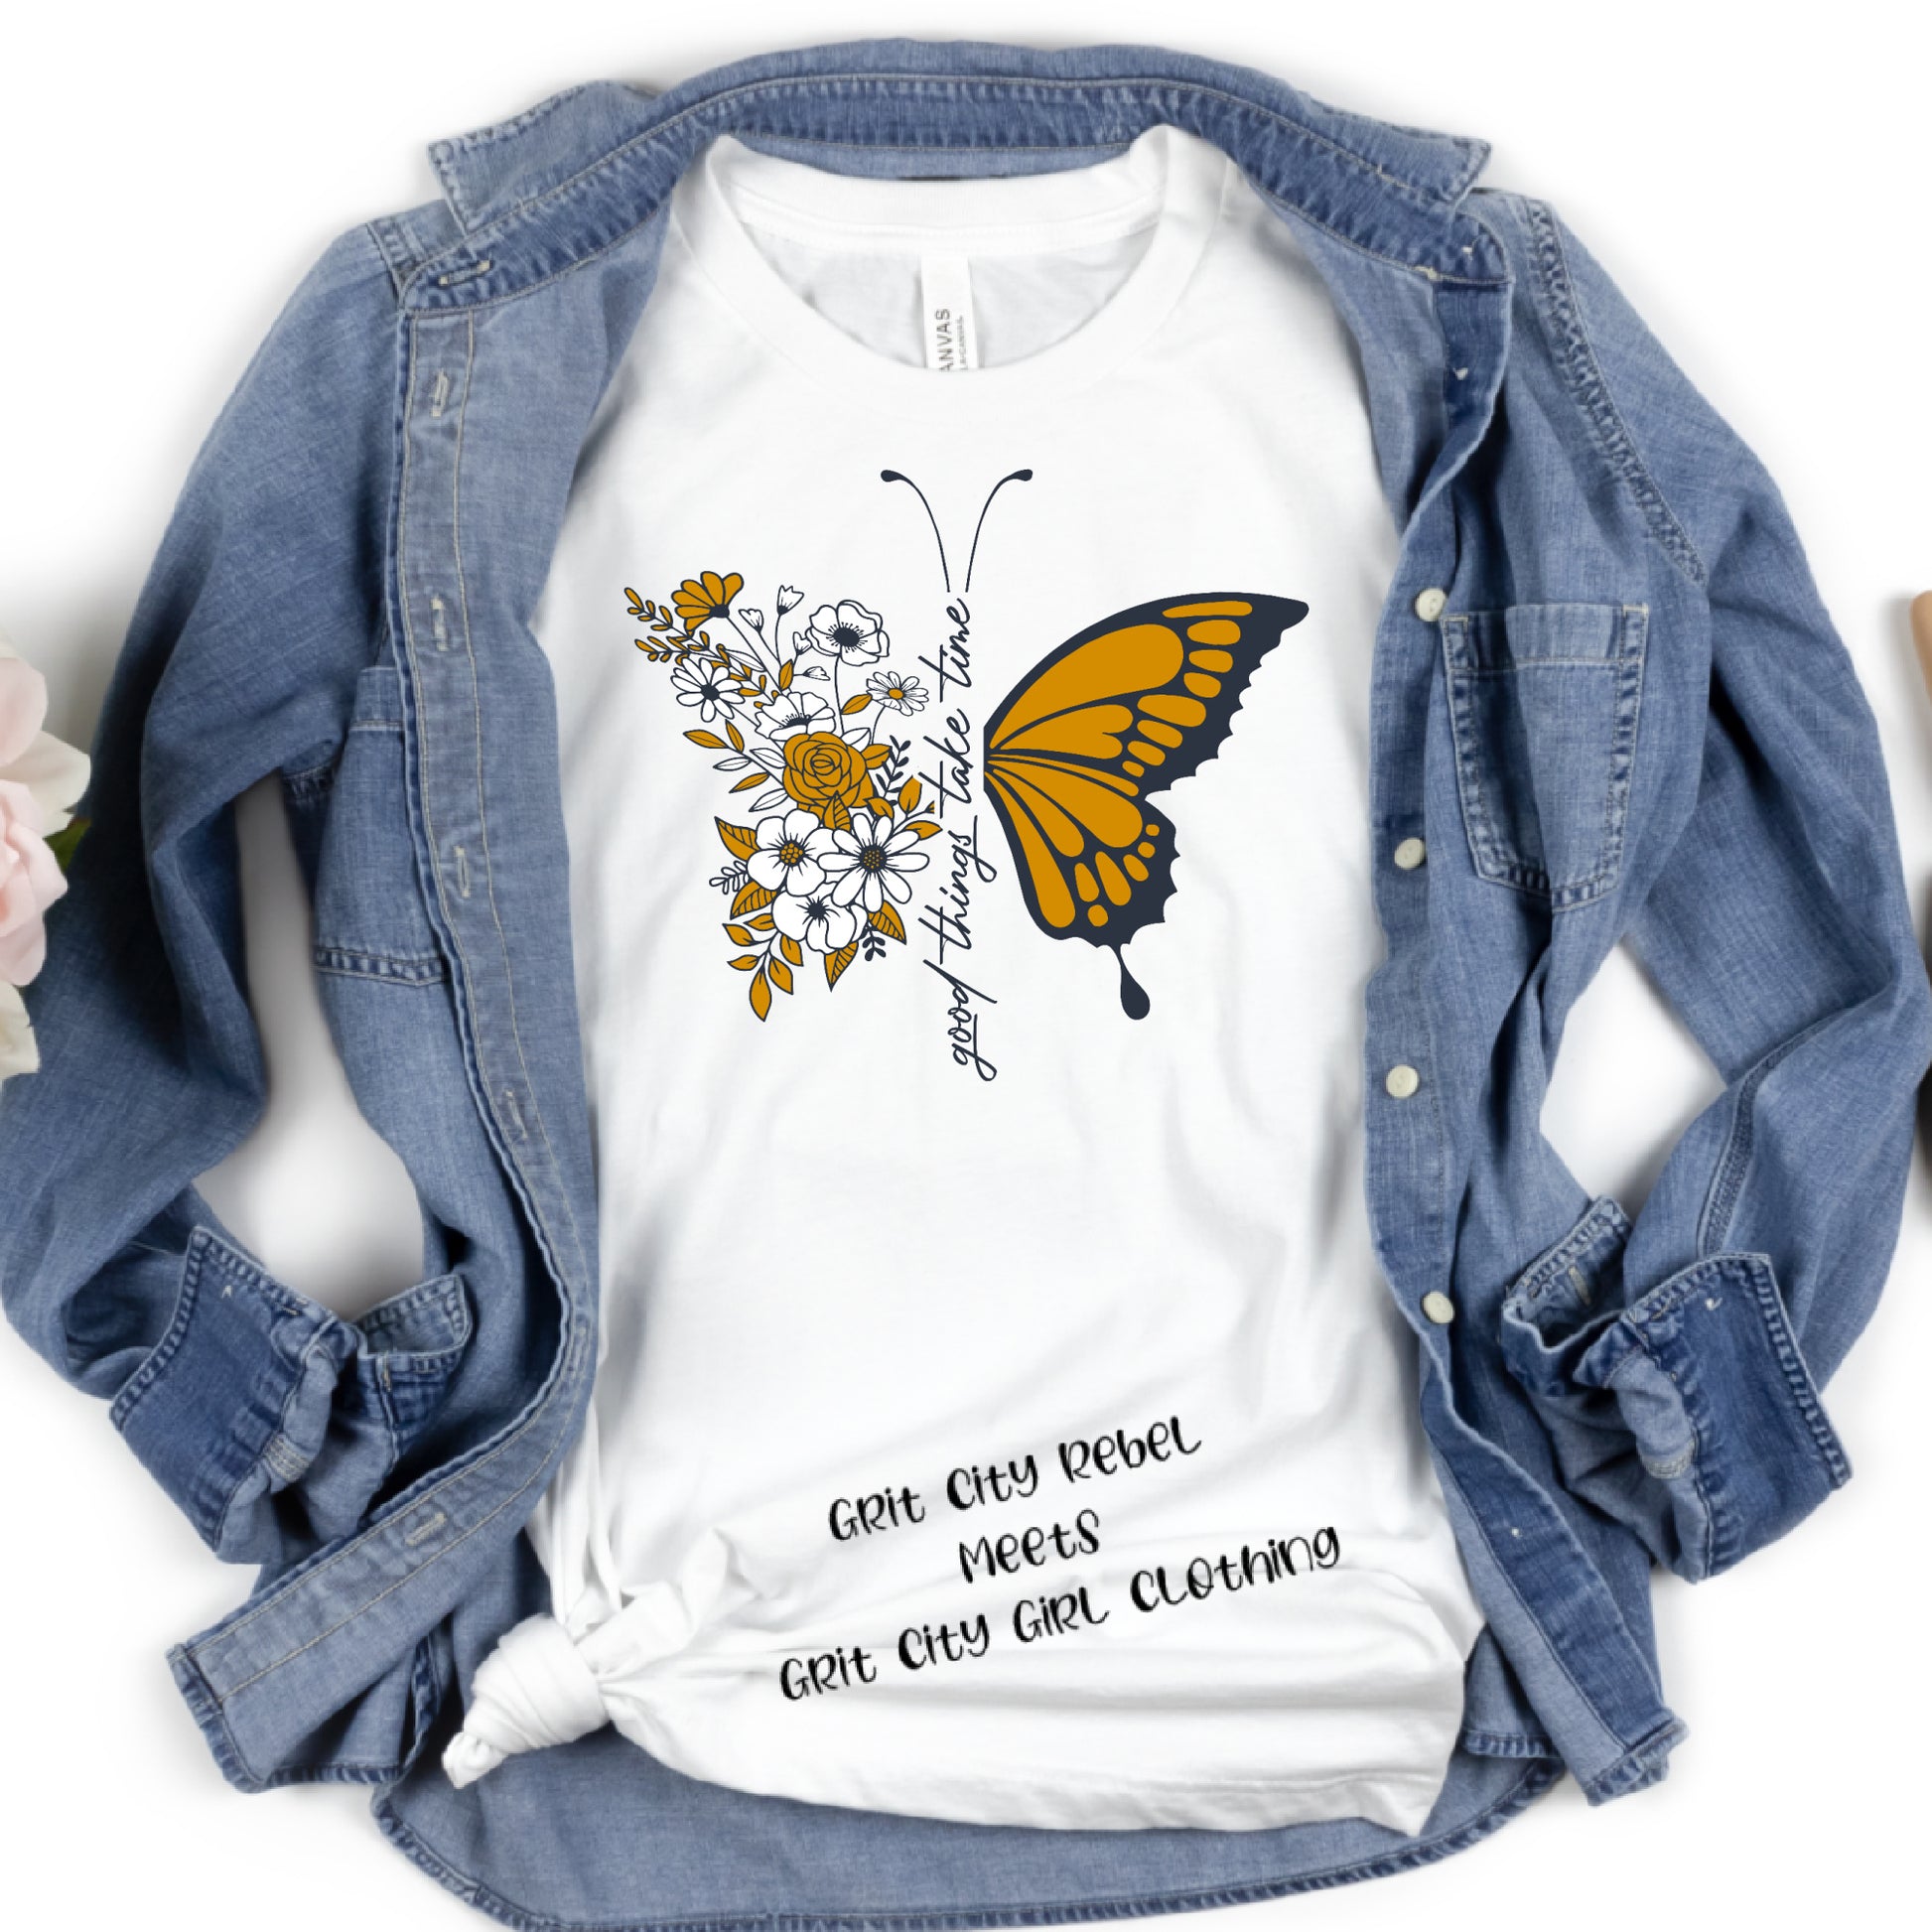 Butterfly graphic saying Good Things Take Time Grit City Rebel